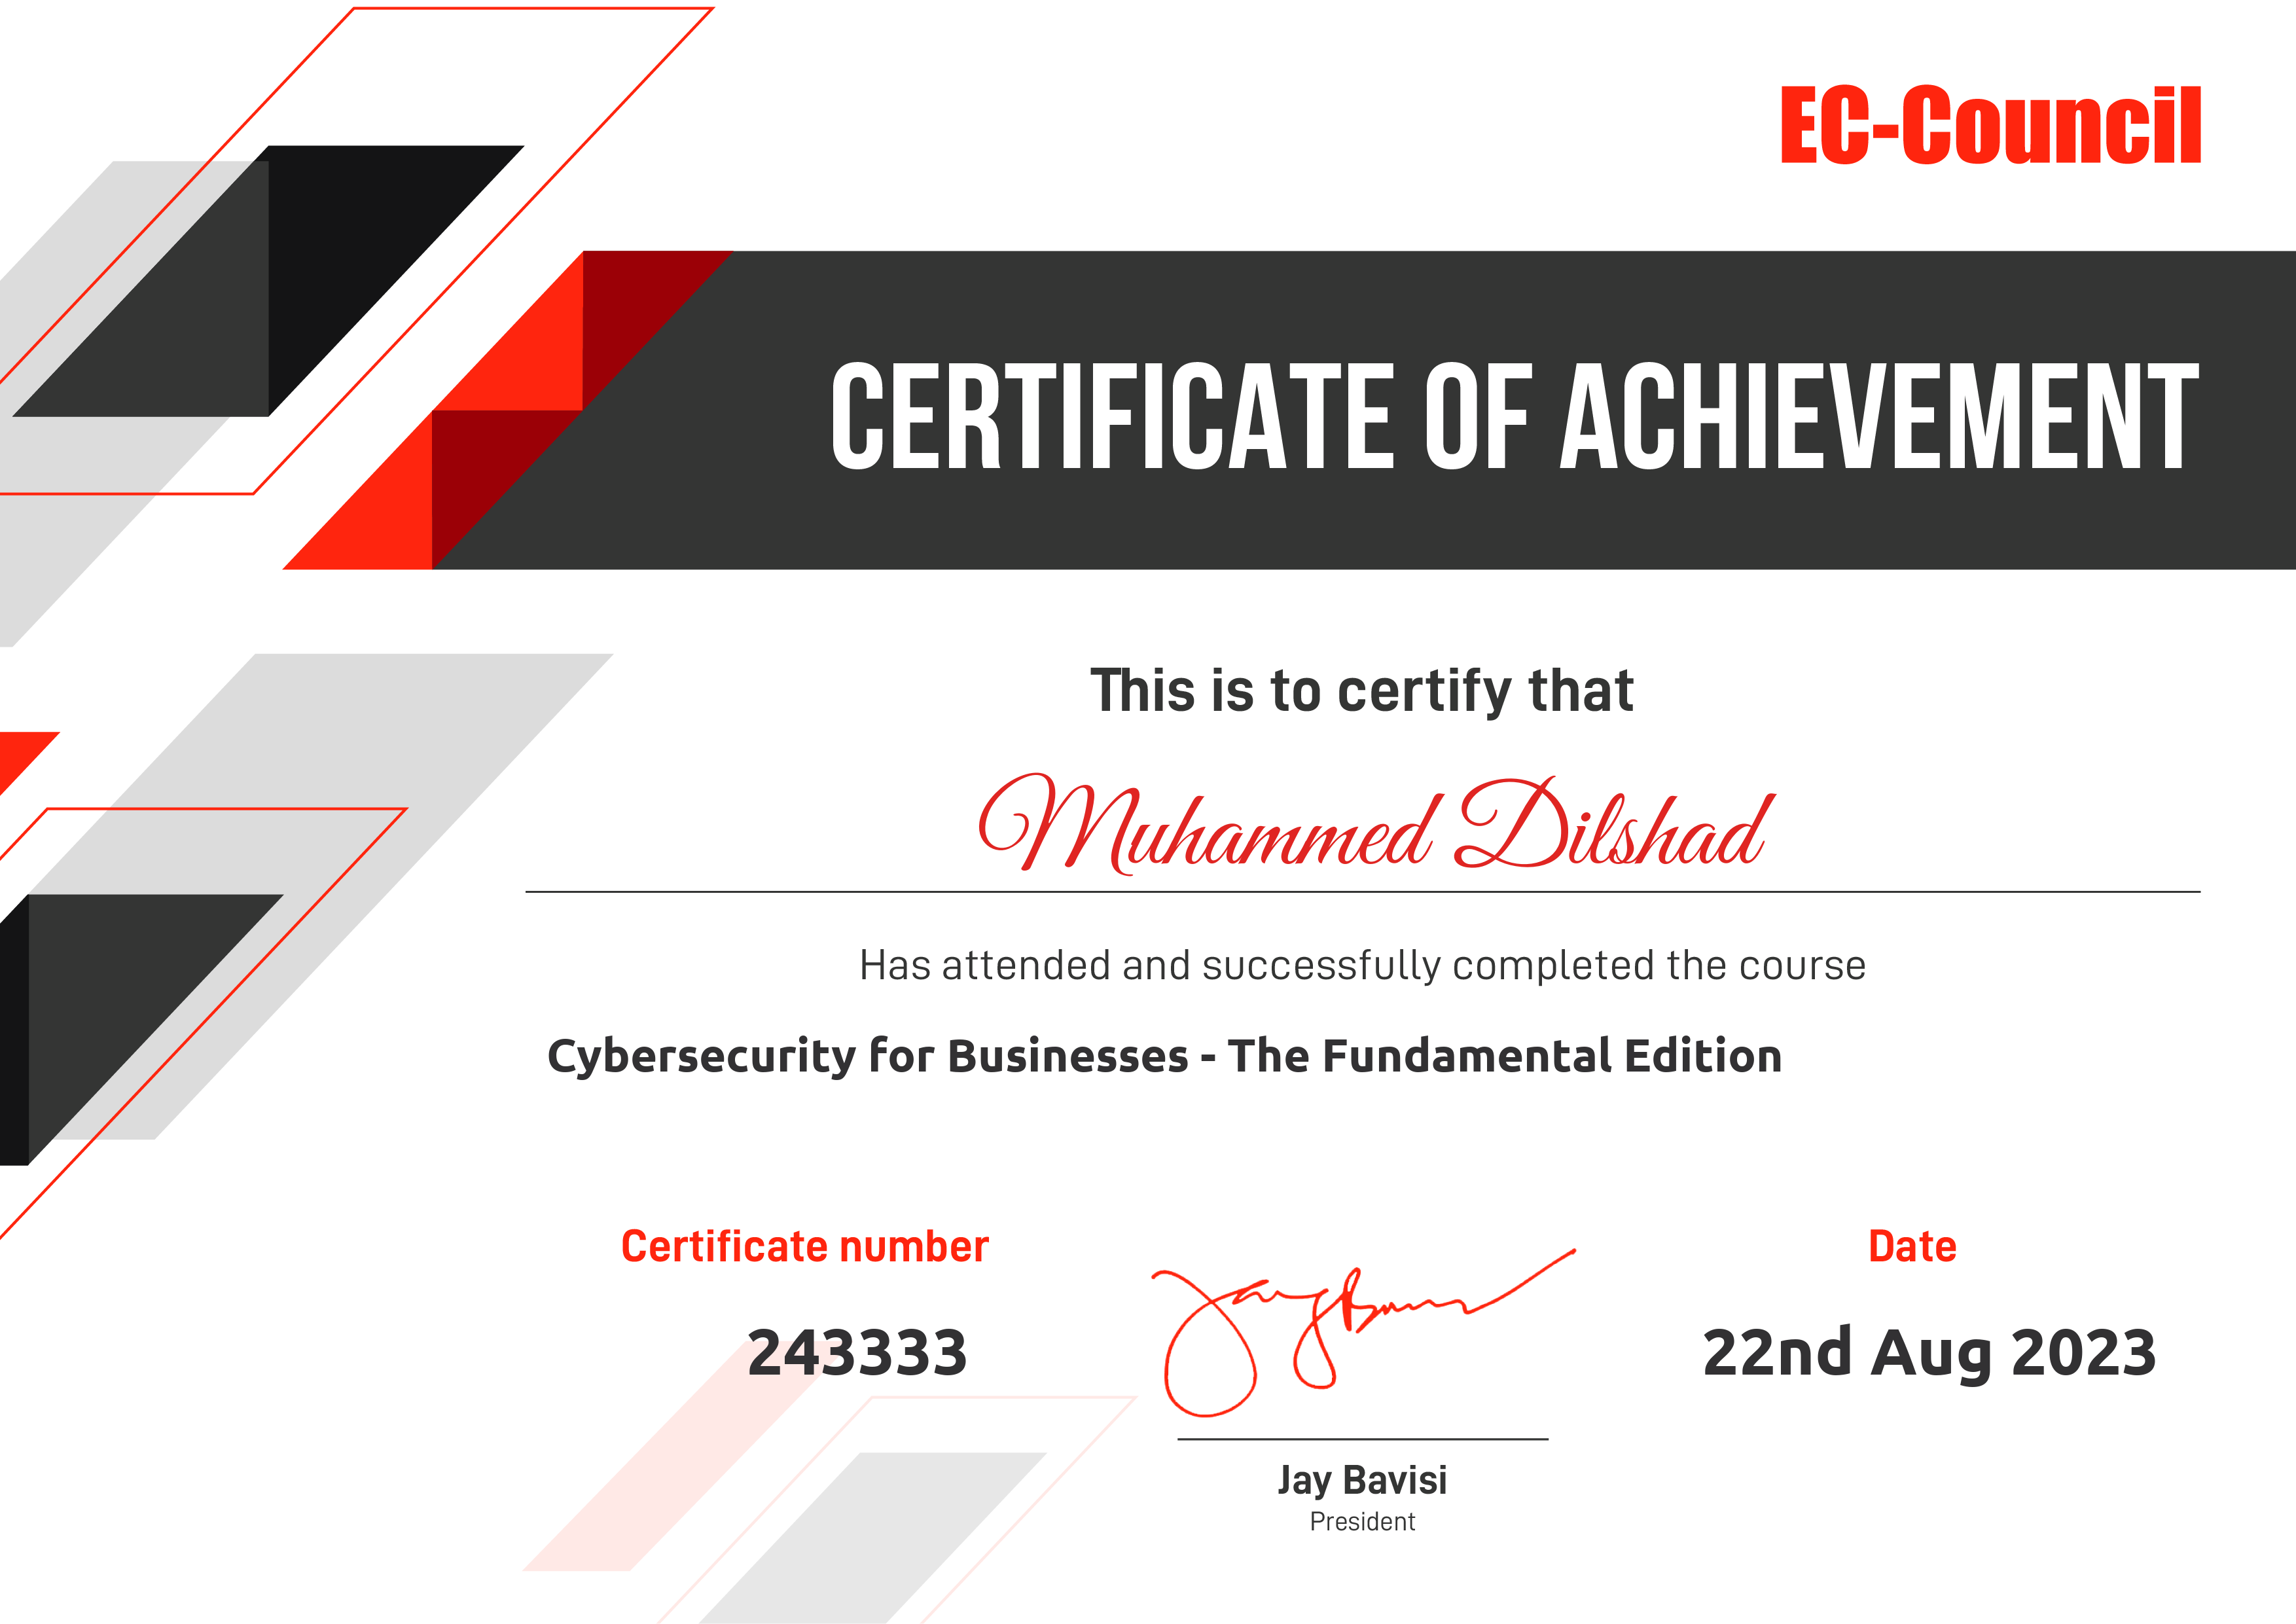 yy CERTIFICATE OF ACHIEVEMENT

This is to certify that

4 C)Vlutammed EDilshad

Has attended and successfully completed the course
Cybersecurity for Businesses - The Fundamental Edition

Certificate number Date
243333 SE 22nd Aug 2023

Jay Bavisi

President